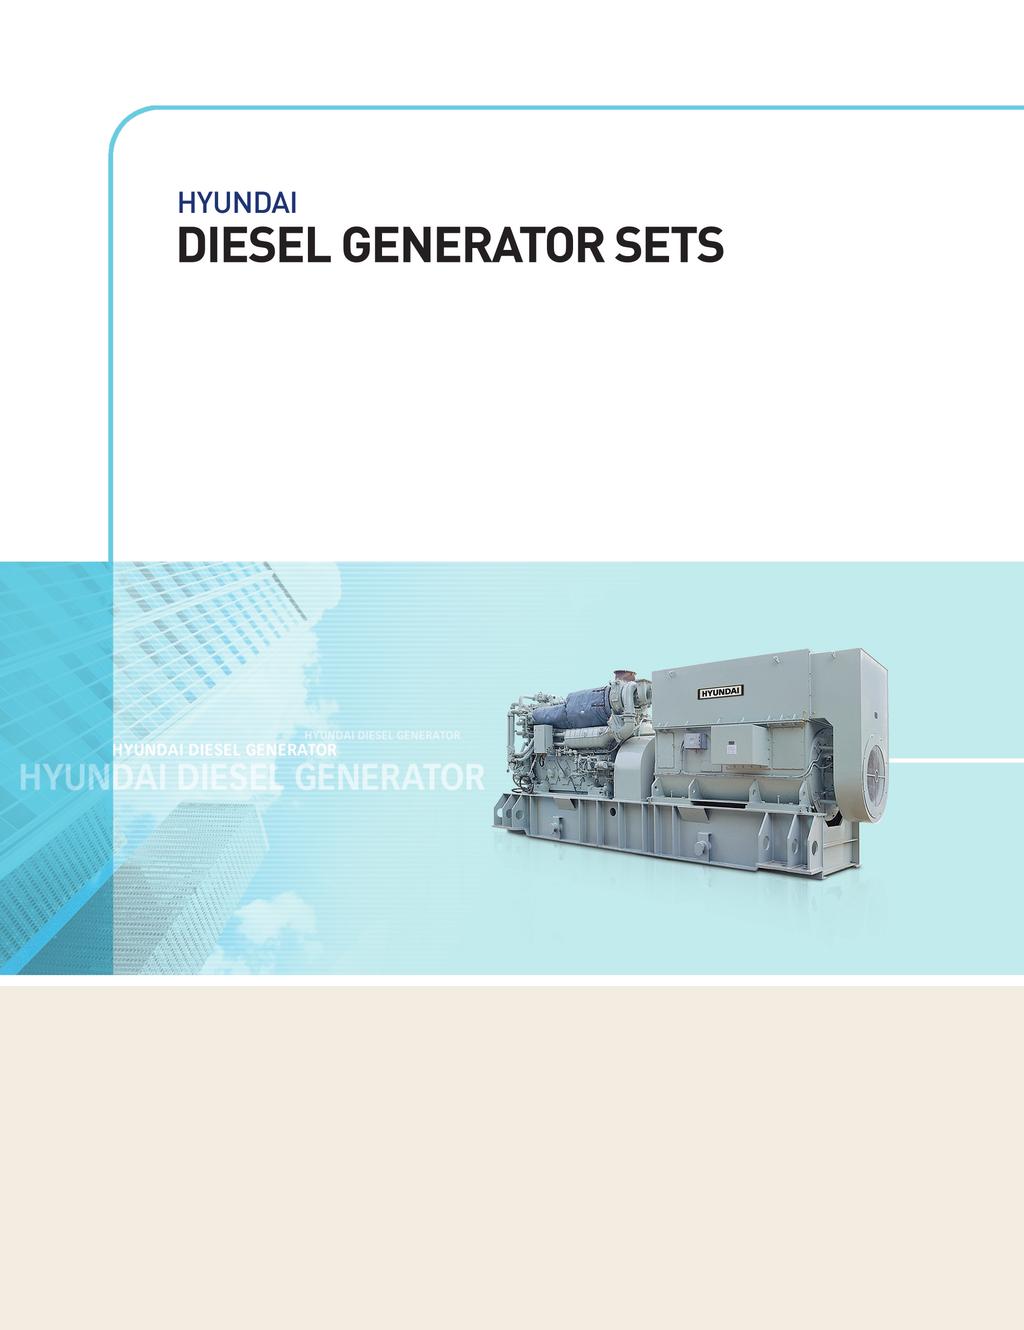 HHI, Hyundai Heavy Industries Co. Ltd., is one of the world s leading synchronous Diesel Generator Set manufacturers.